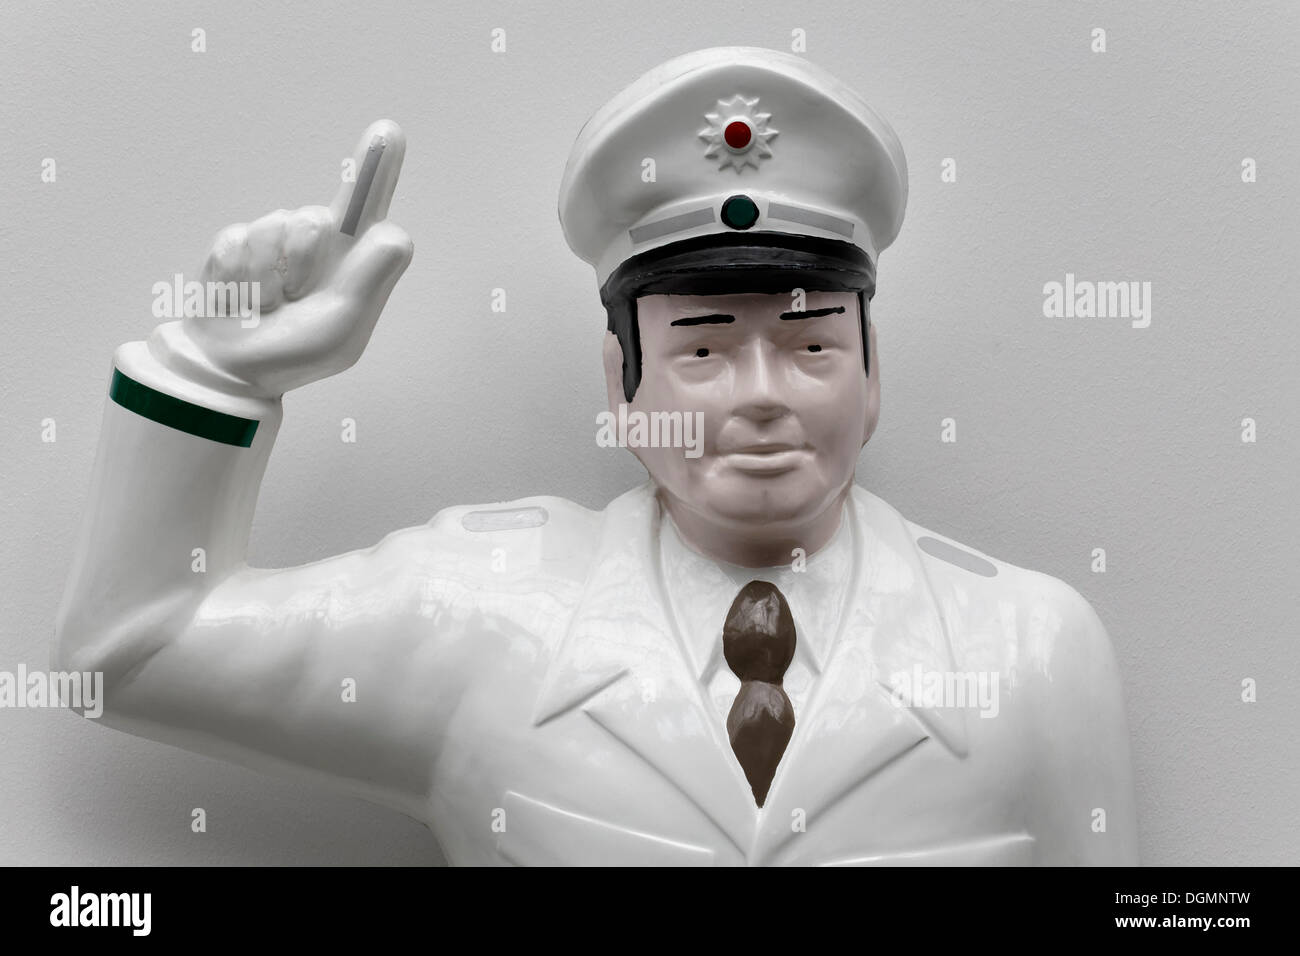 Traffic cop with a wagging finger, figure made of plastic Stock Photo